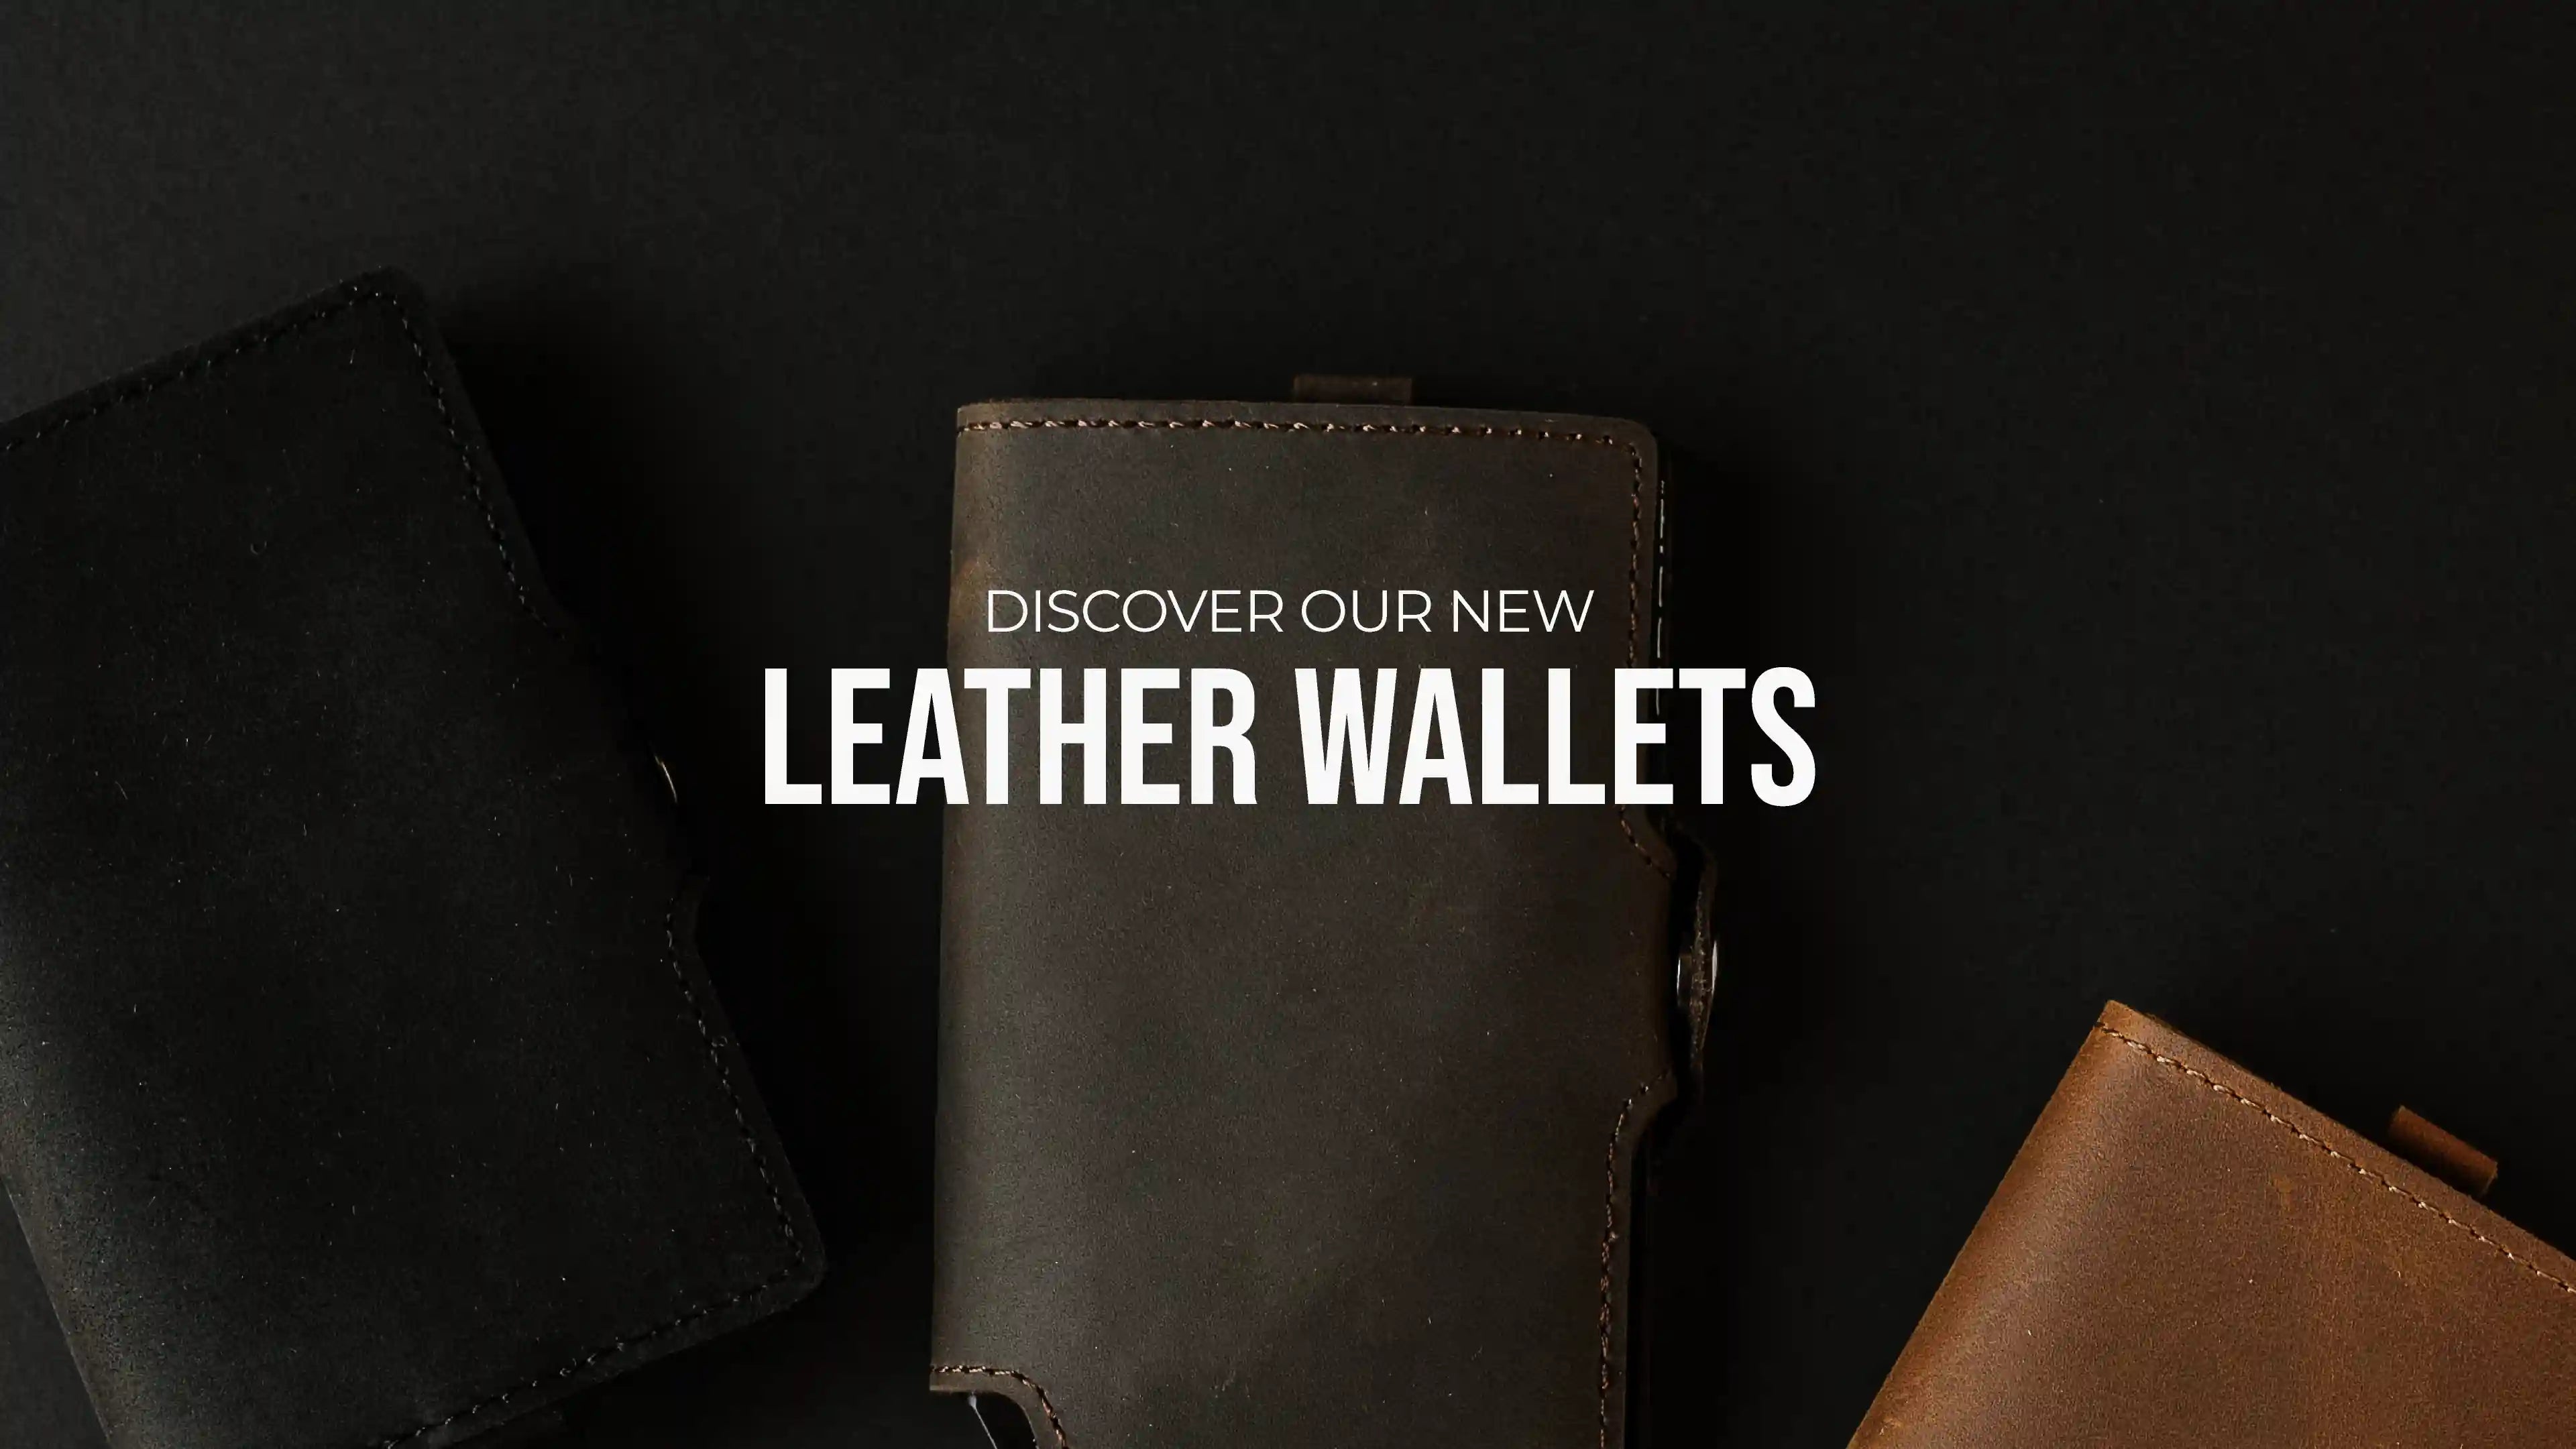 New product banner featuring leather wallets